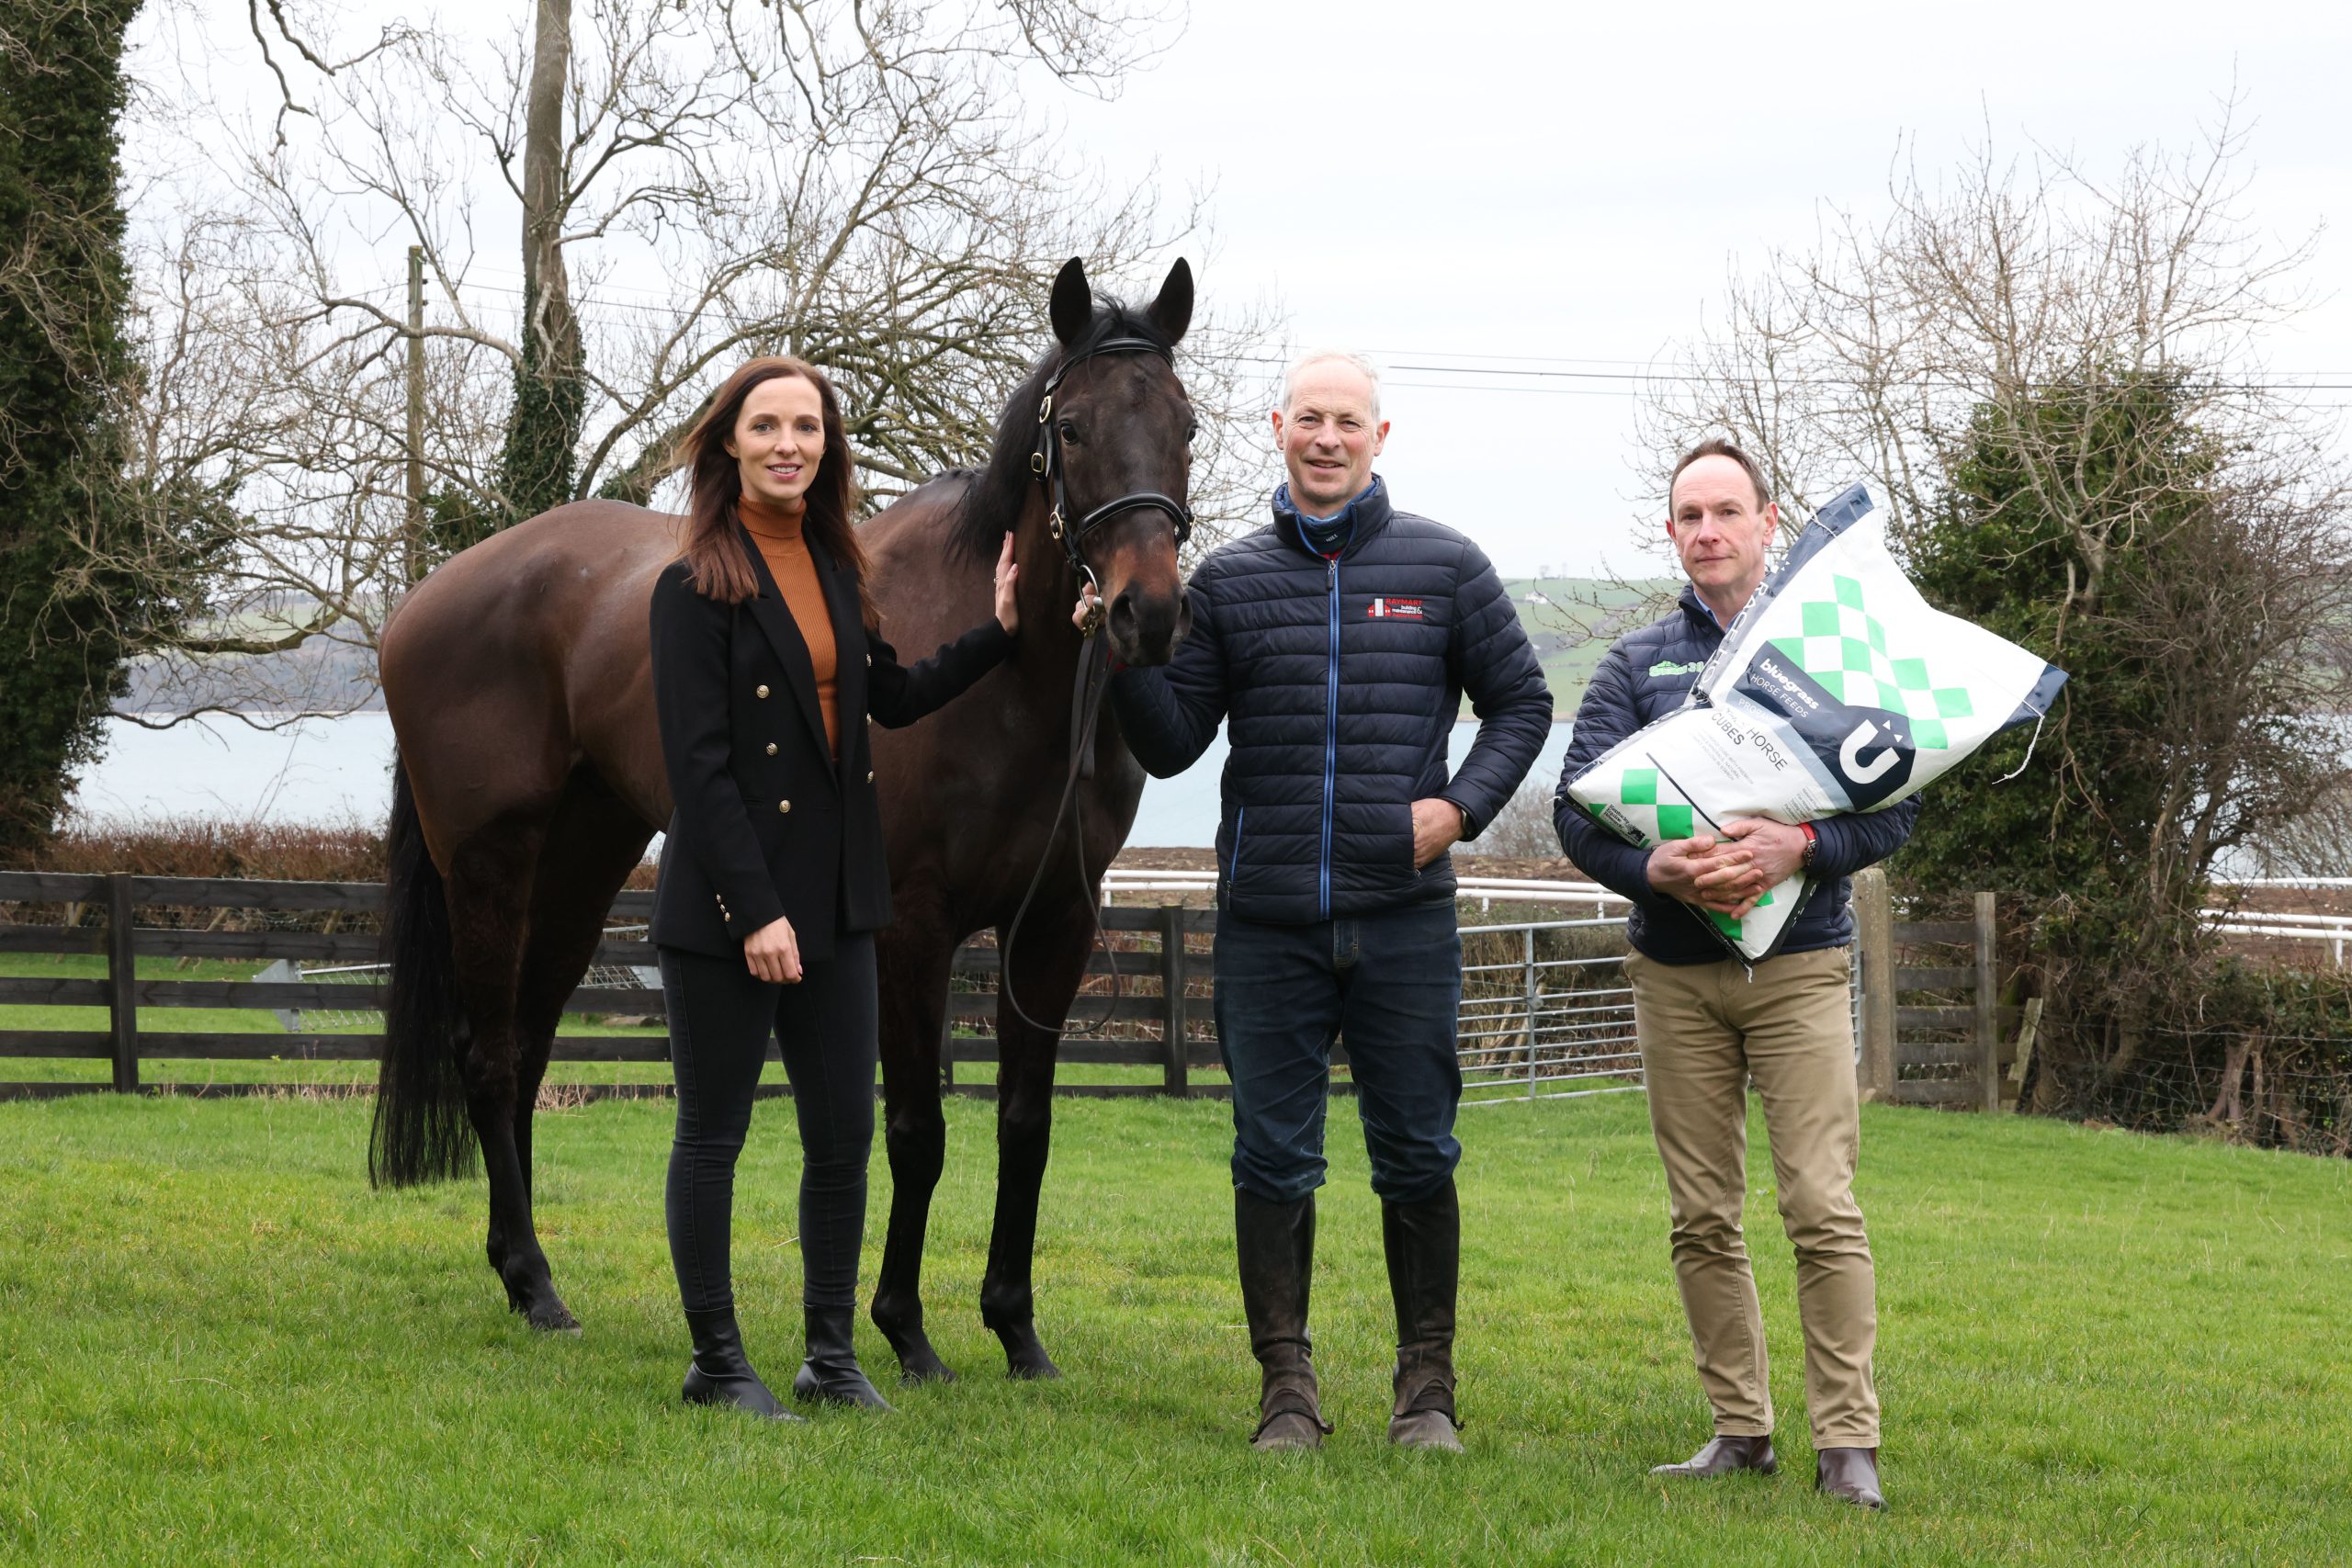 Down Royal Announces Bluegrass Horse Feed as Official Sponsor of St Patrick’s Day Fixture